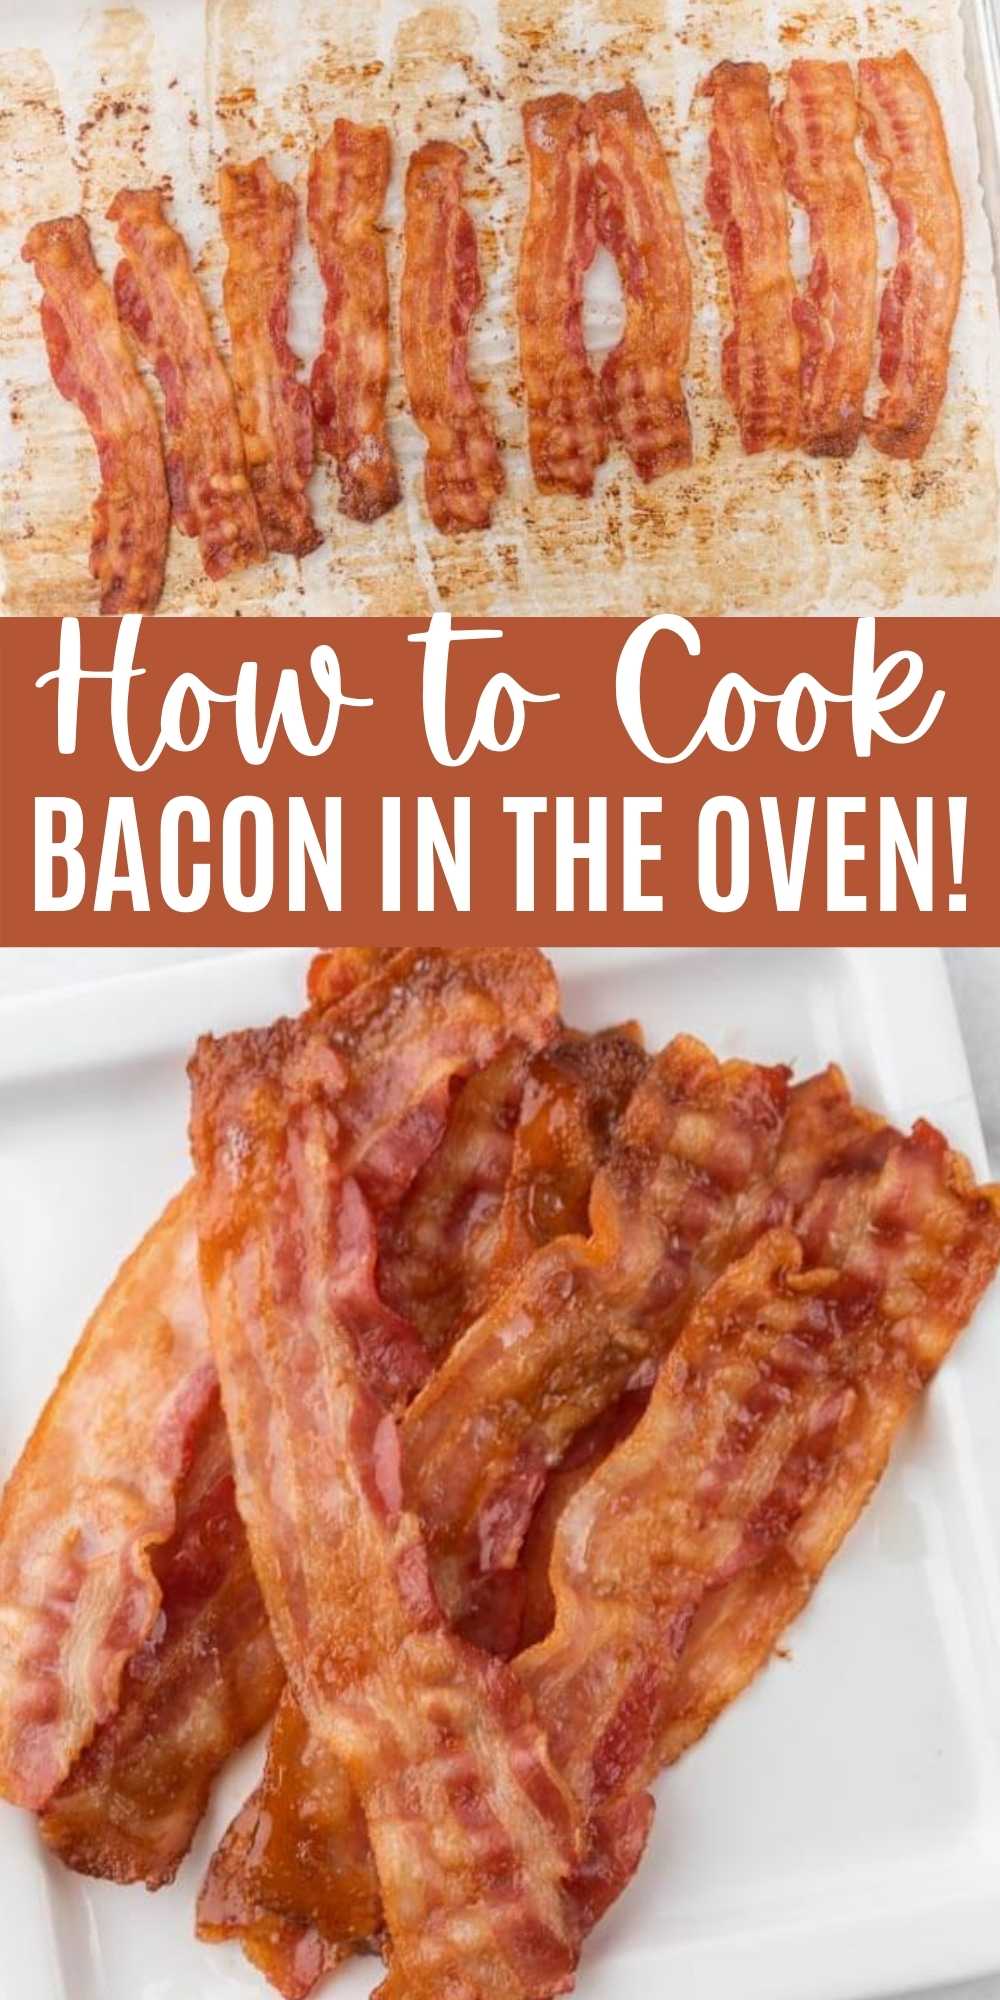 This is the best way to make bacon! Learn how to cook bacon in the oven so it’s still crispy and there is no mess to clean up! Plus check out all our tips and tricks for this simple bacon recipe.  Baking bacon is easy to do and tastes great too! #eatingonadime #bacon #breakfast #breakfast #breakfastrecipes #brunch #easyrecipes #sidedish
